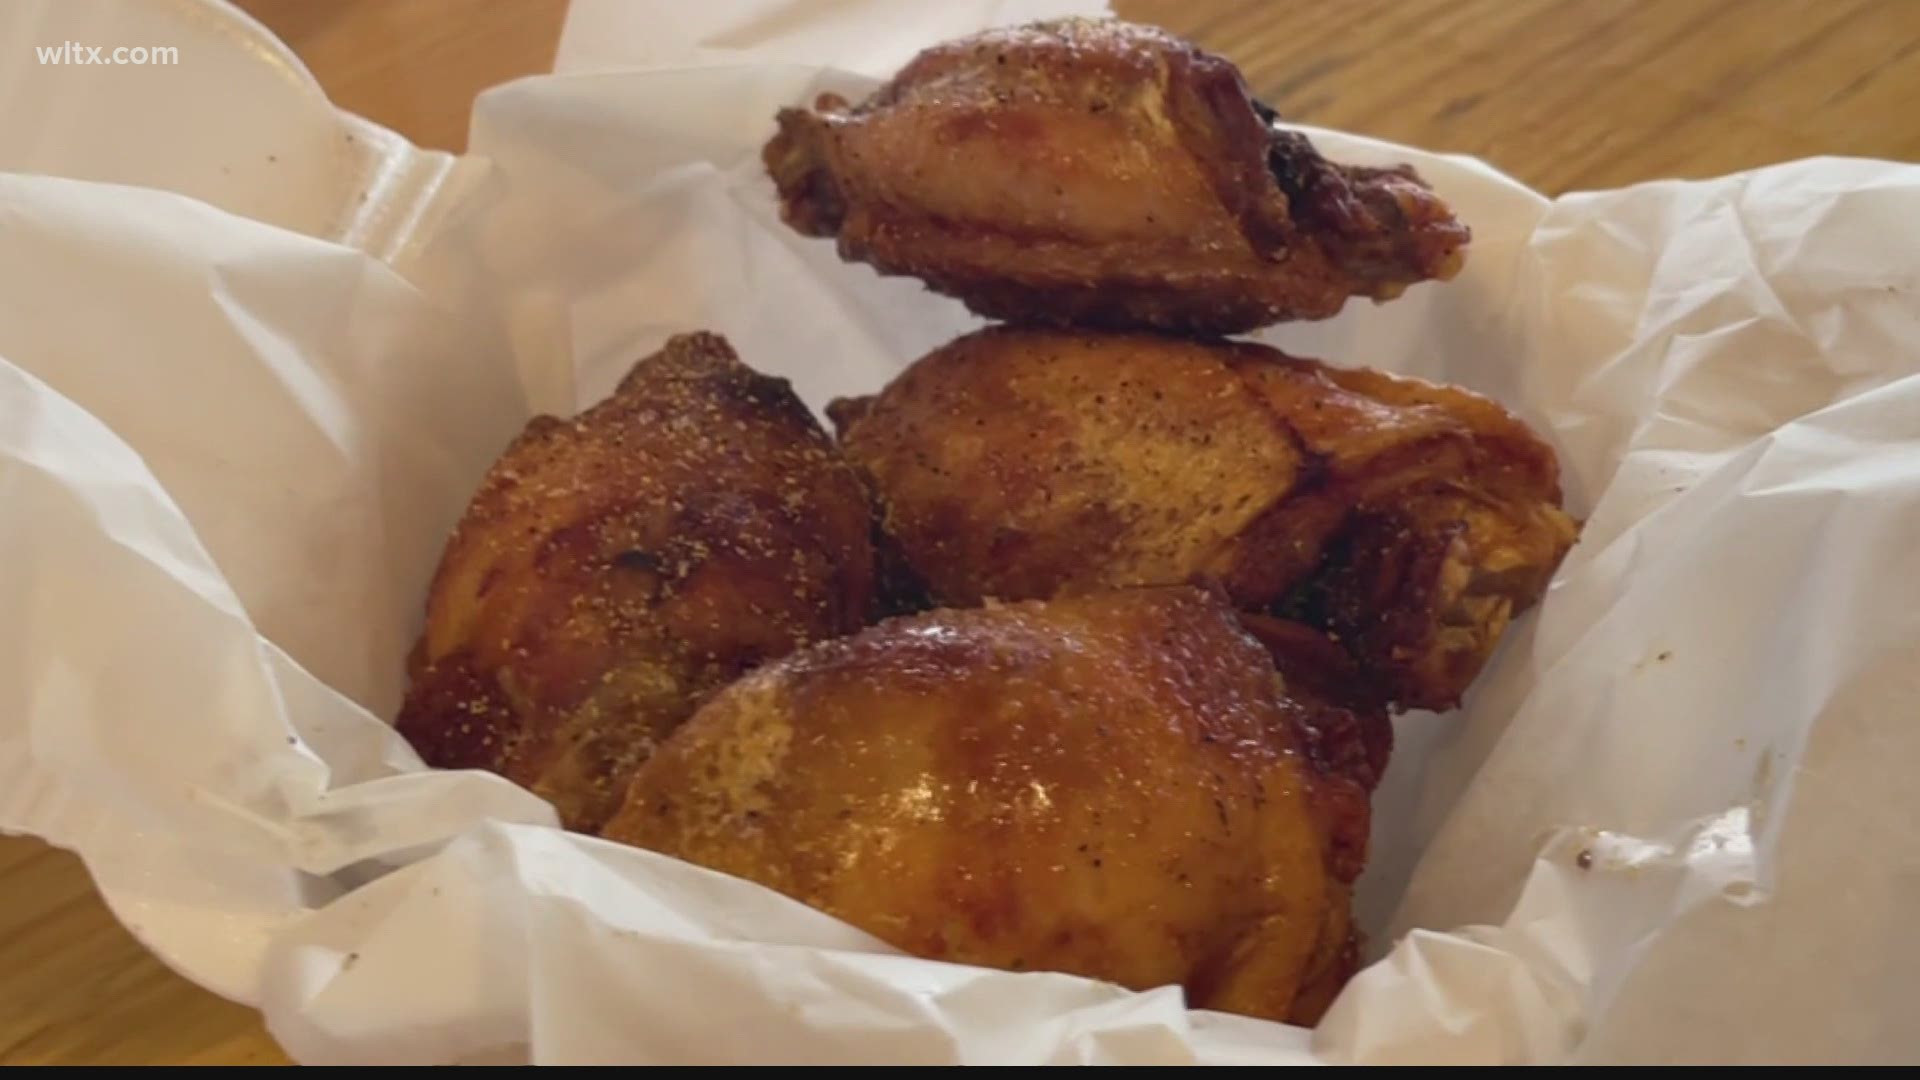 2Fat2Fly stuffed wings were back at Steel Hands brewery after a 3 year hiatus, no word yet on another appearance.